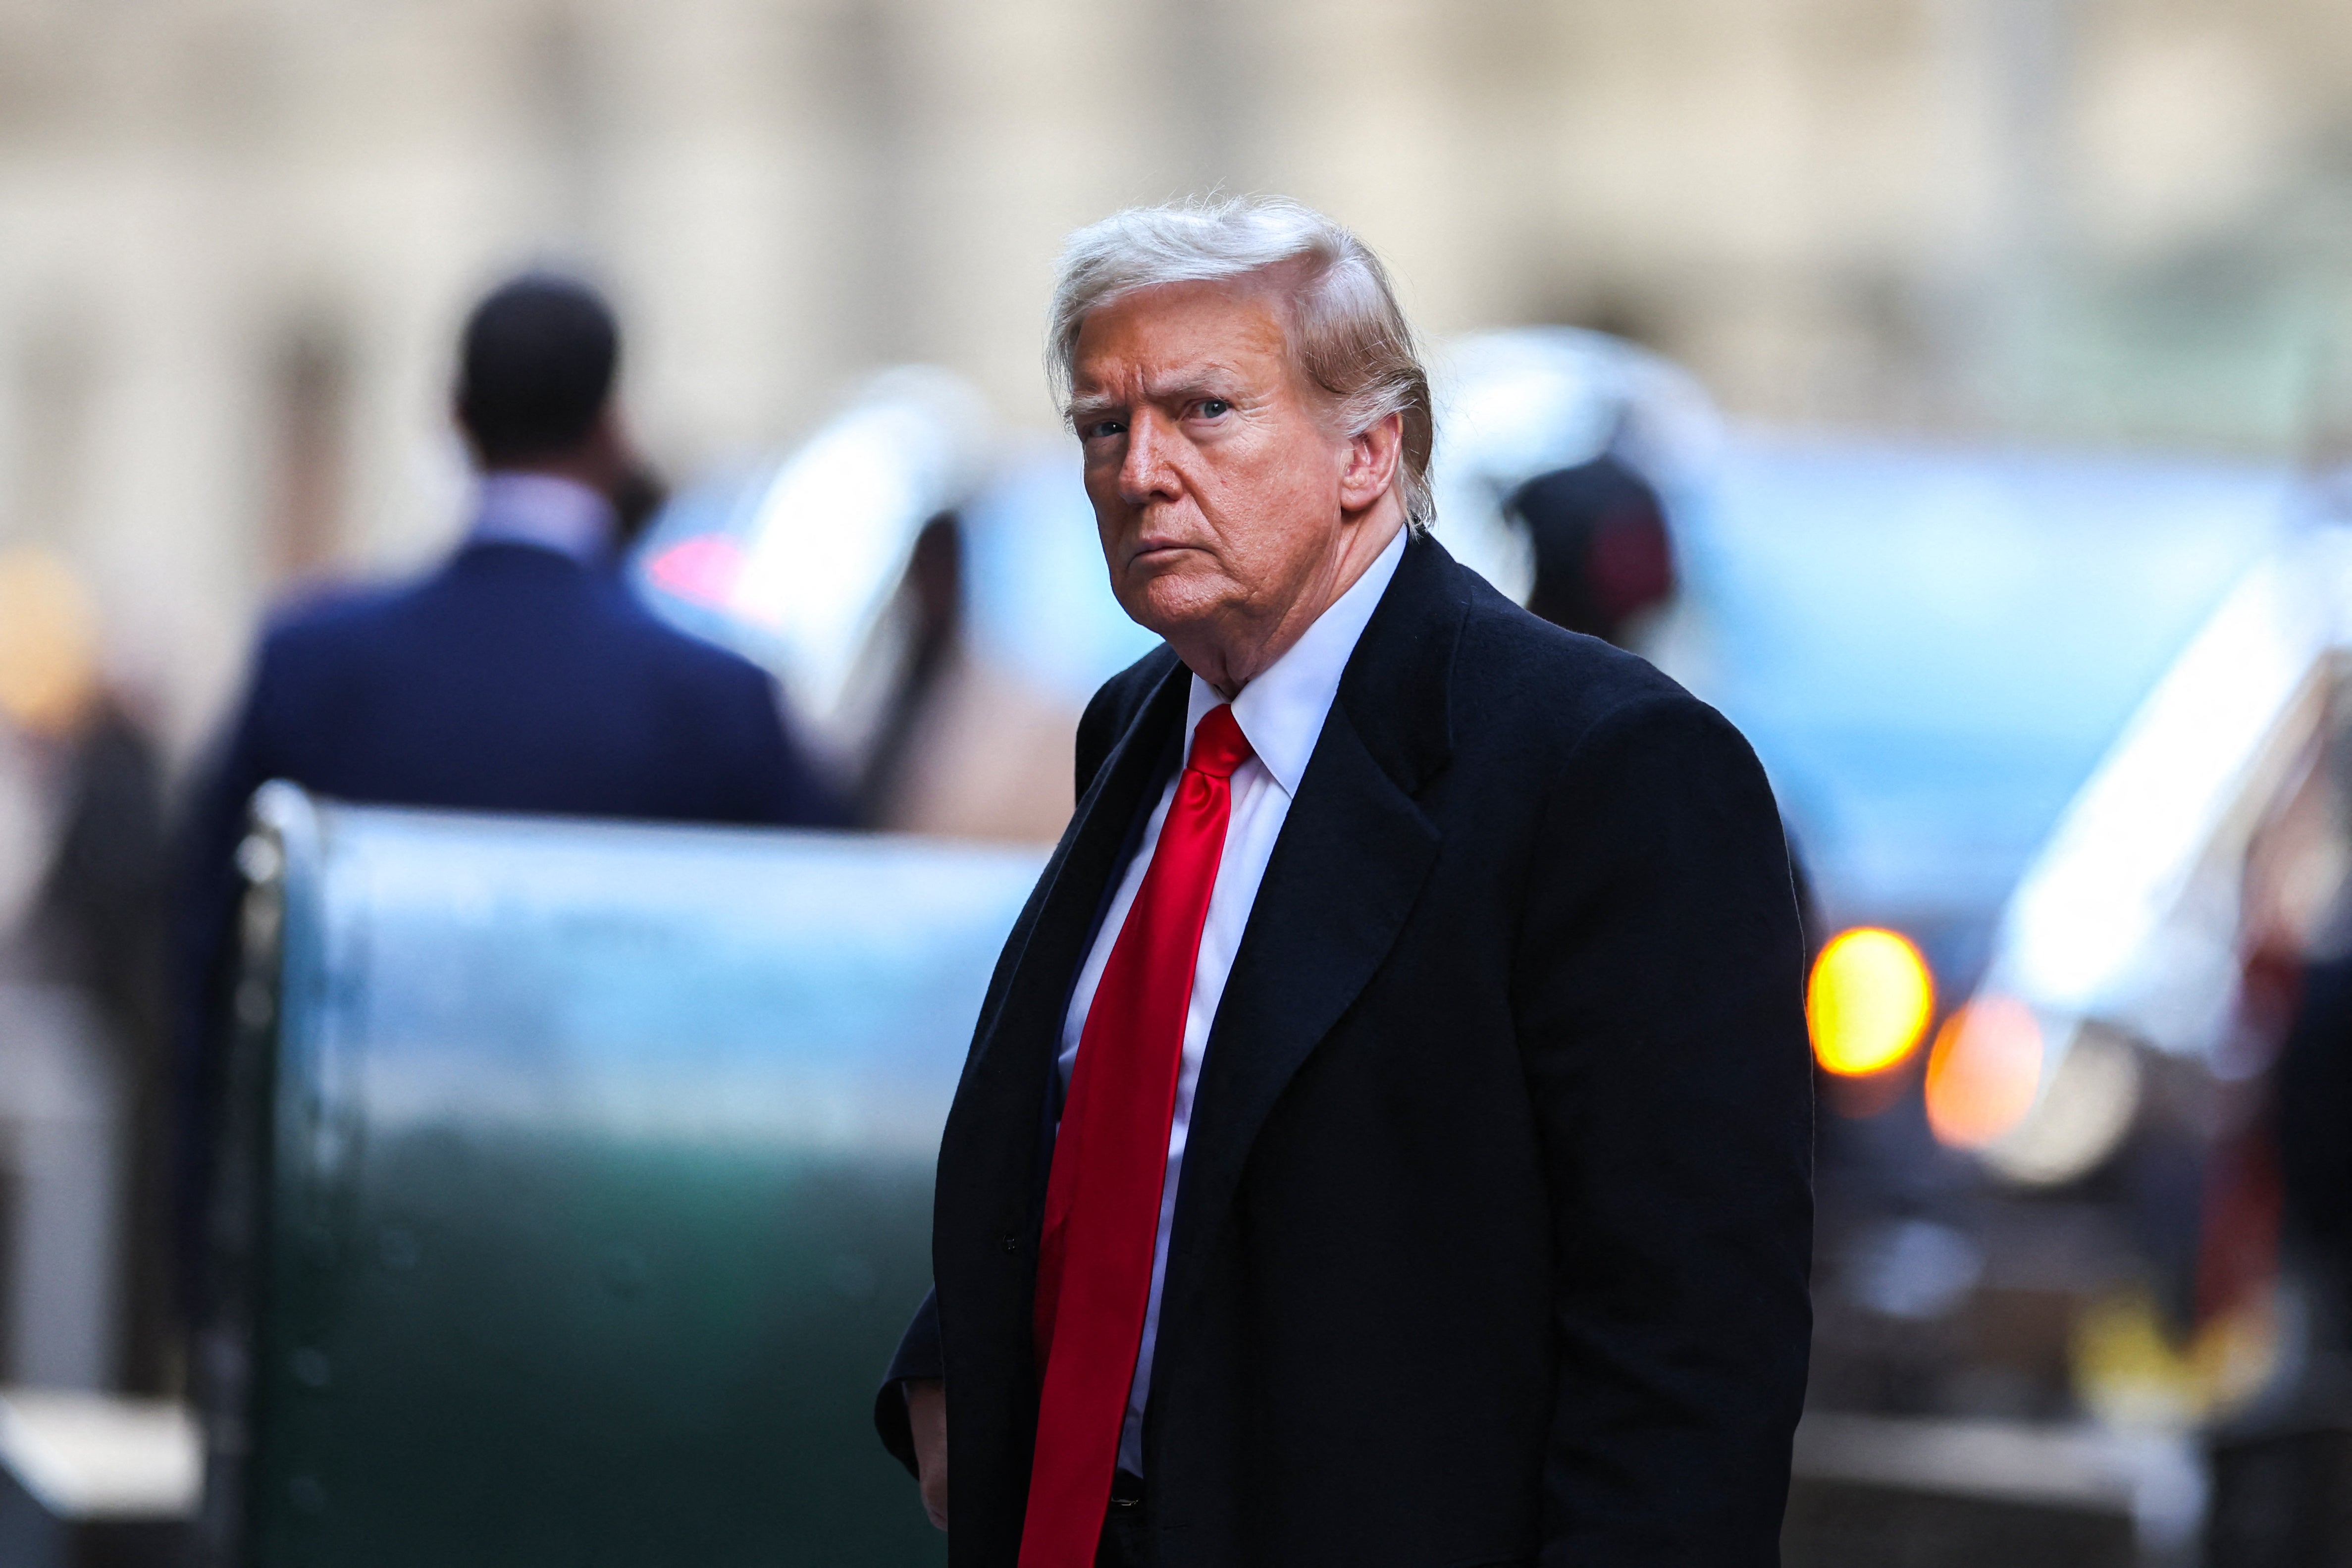 Former US president Donald Trump arrives at 40 Wall Street after a court hearing